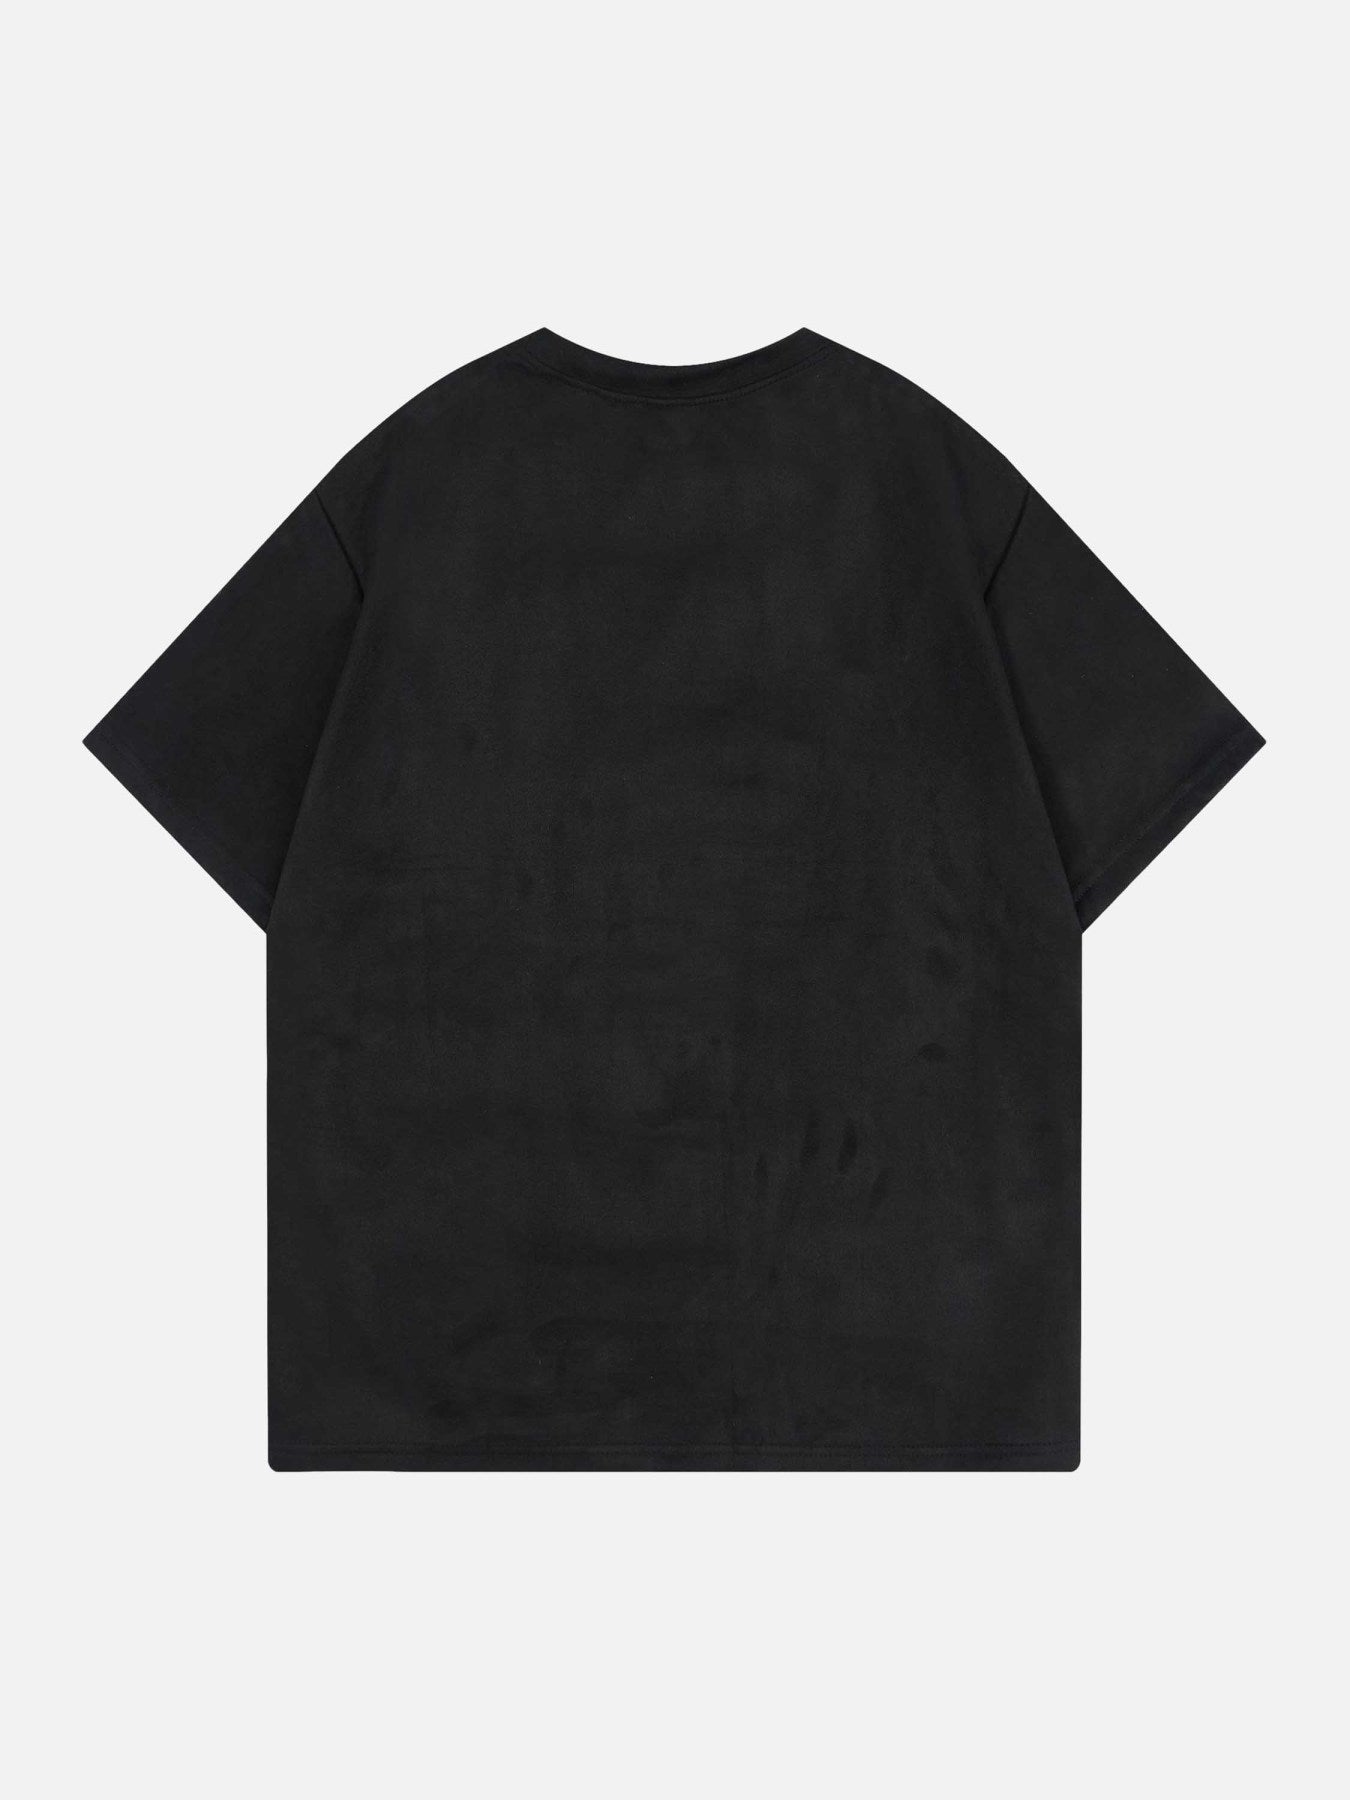 The Supermade Loose Suede Split Print T-shirt